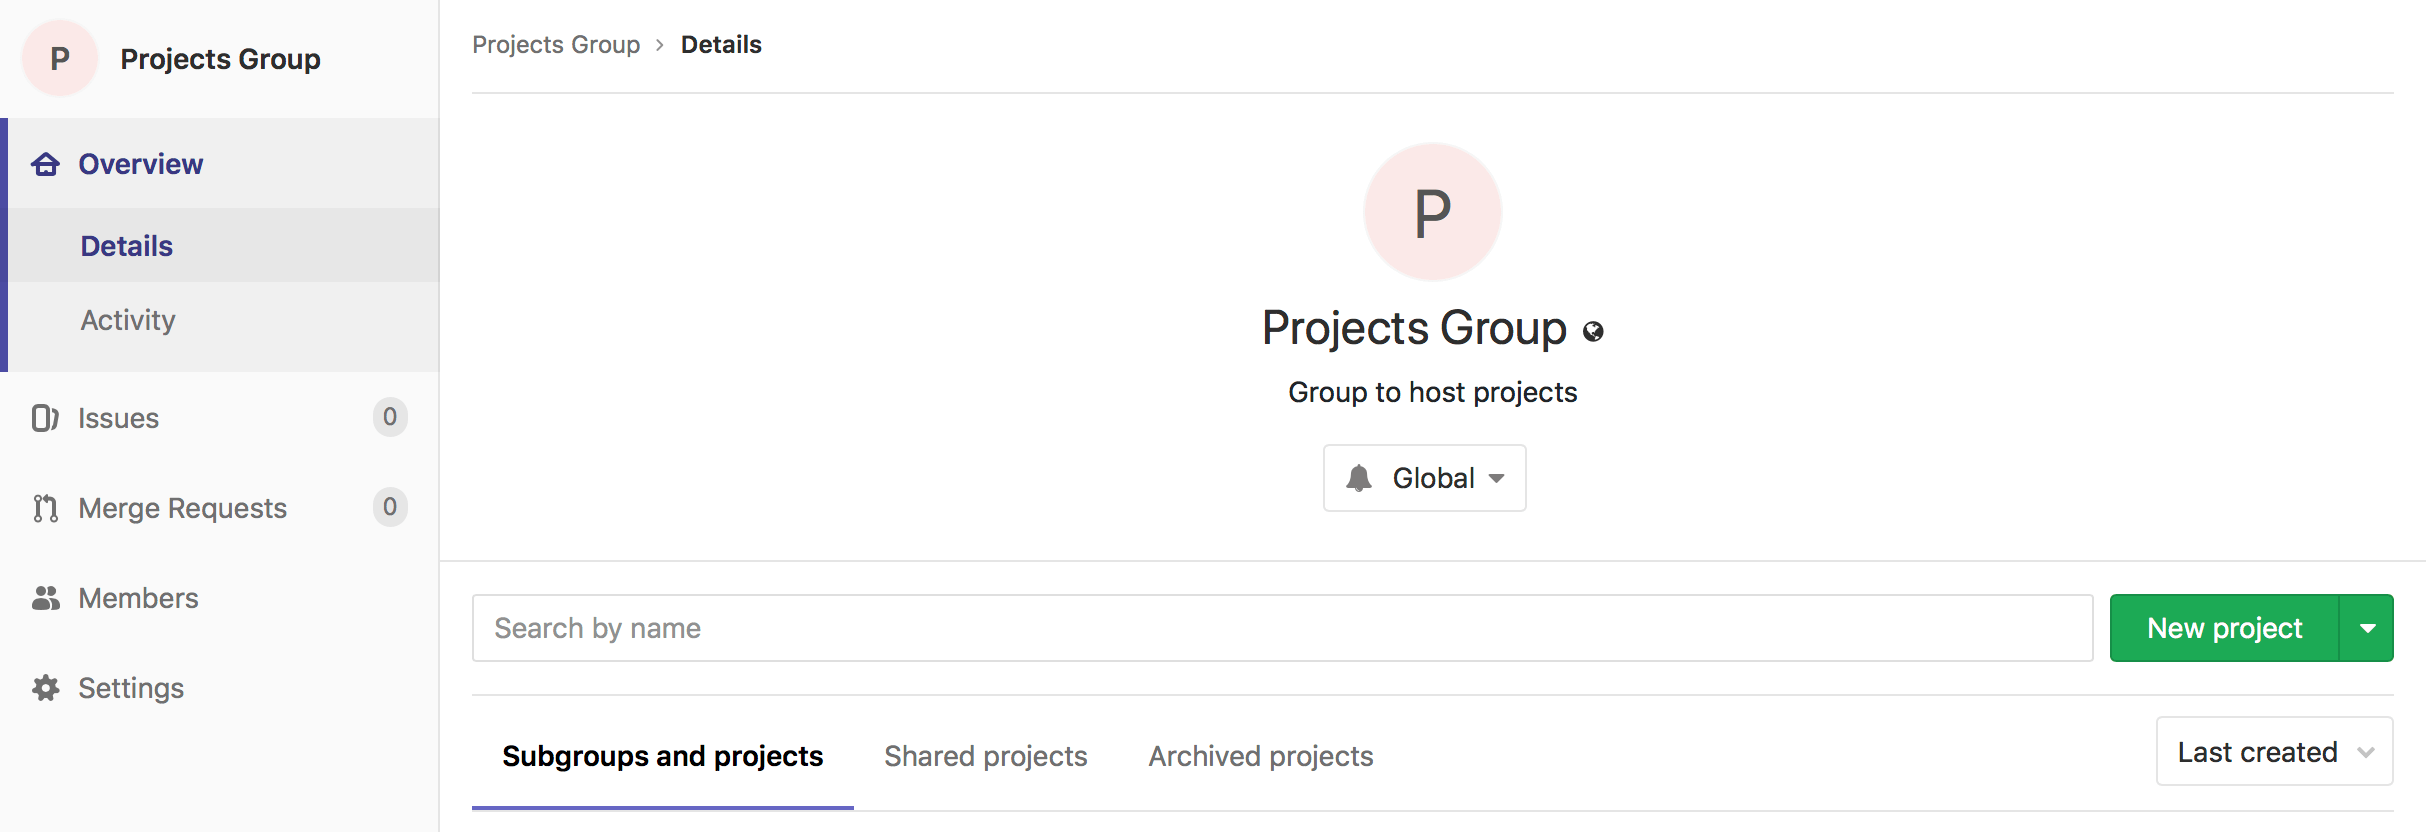 doc/user/group/img/create_new_project_from_group.png